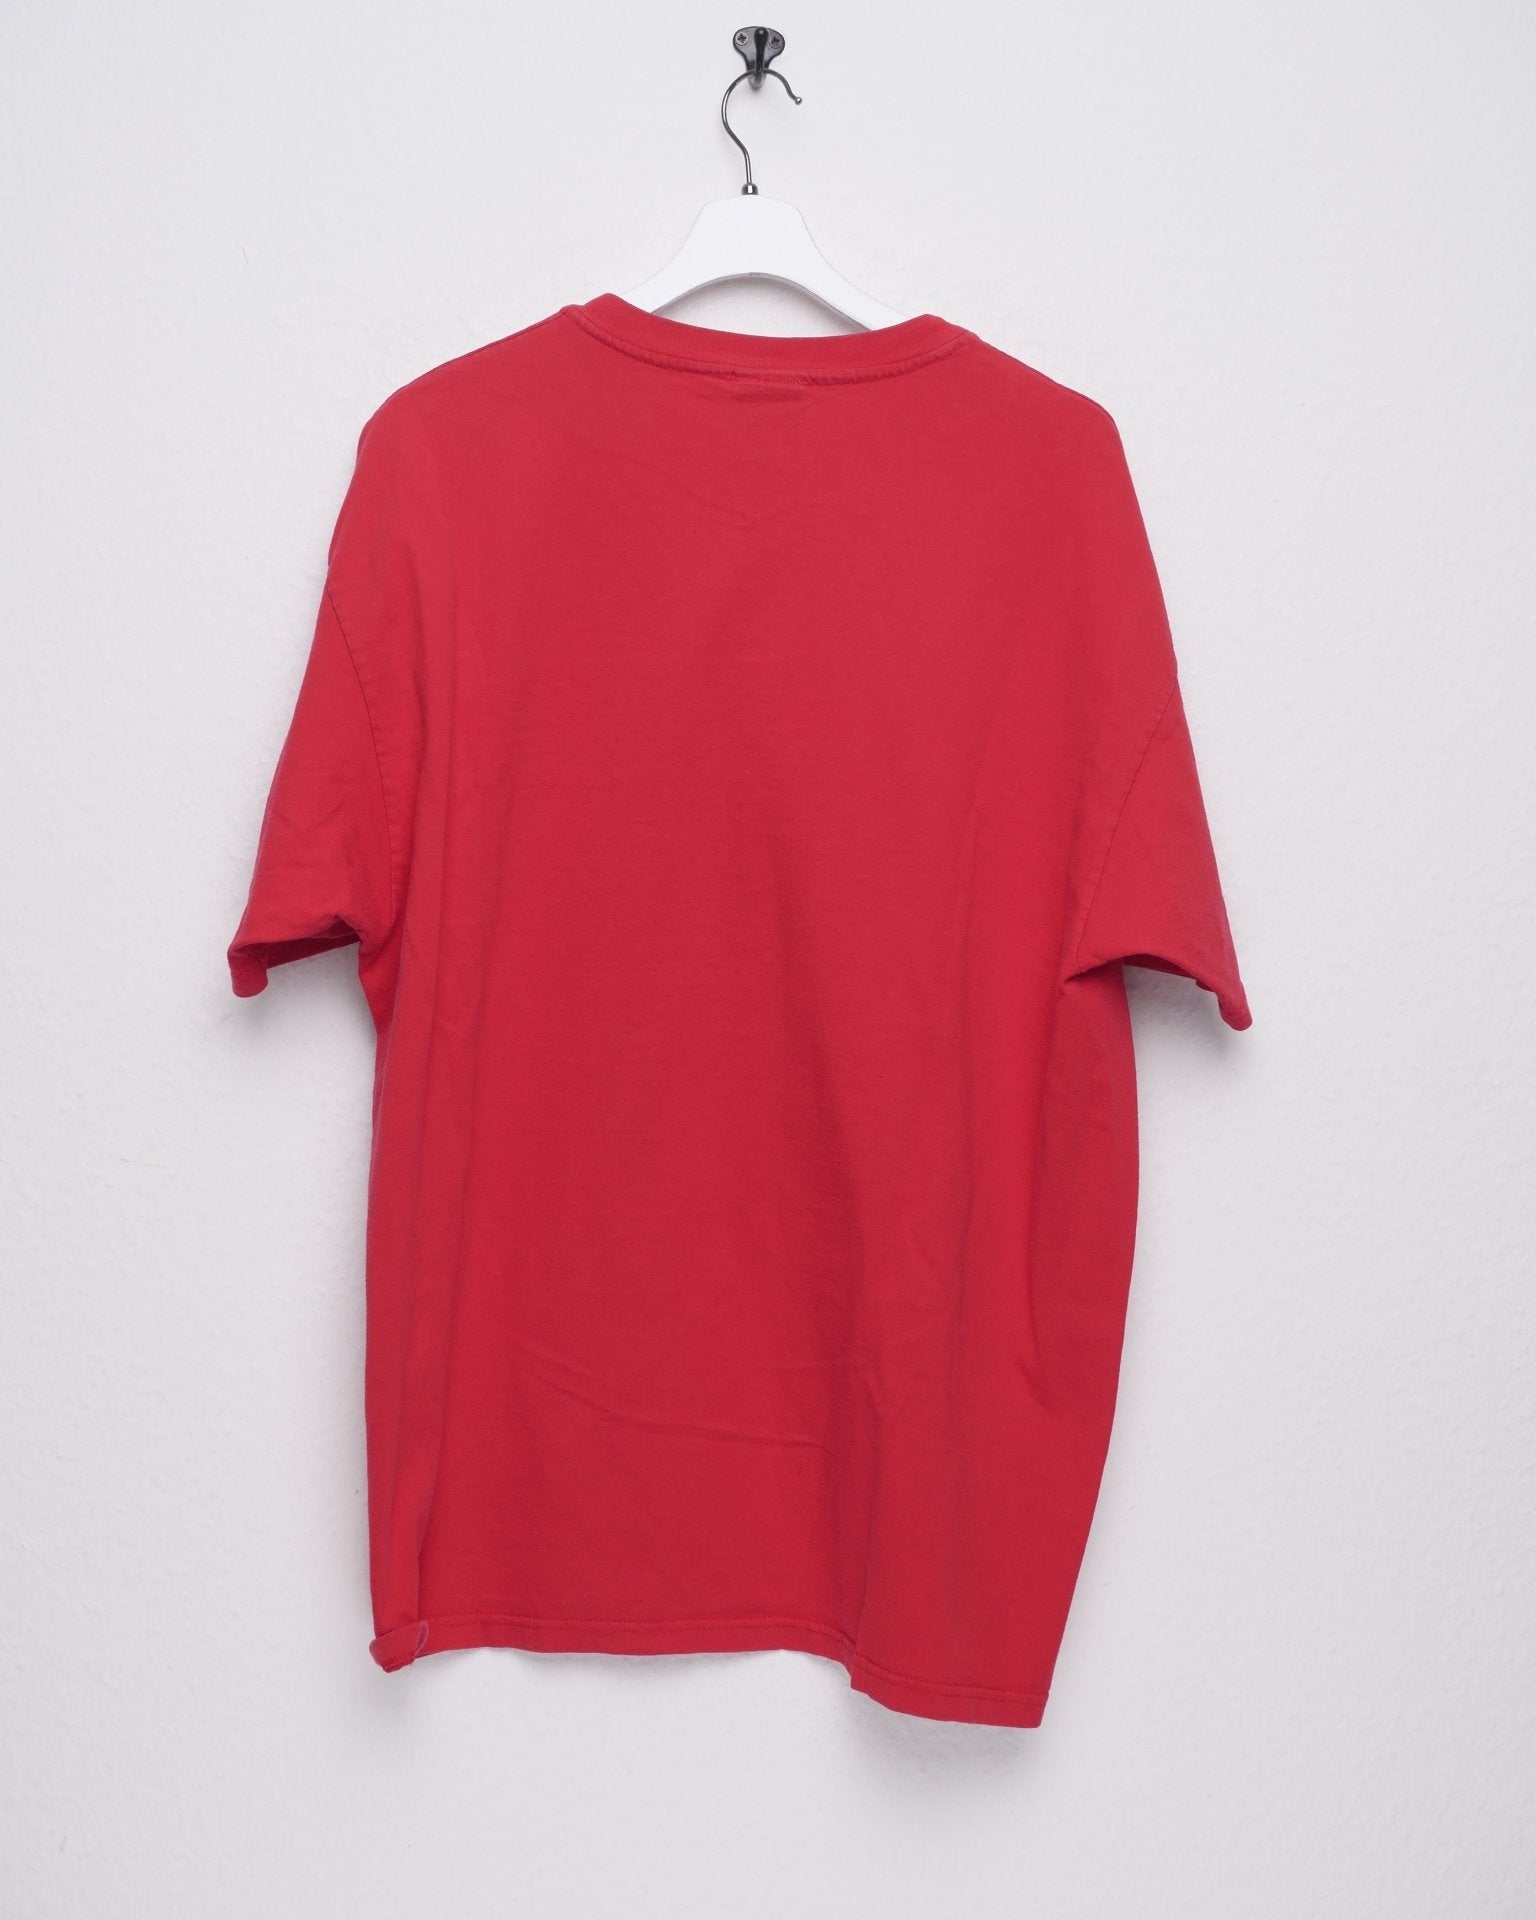 embroidered Logo red washed Shirt - Peeces